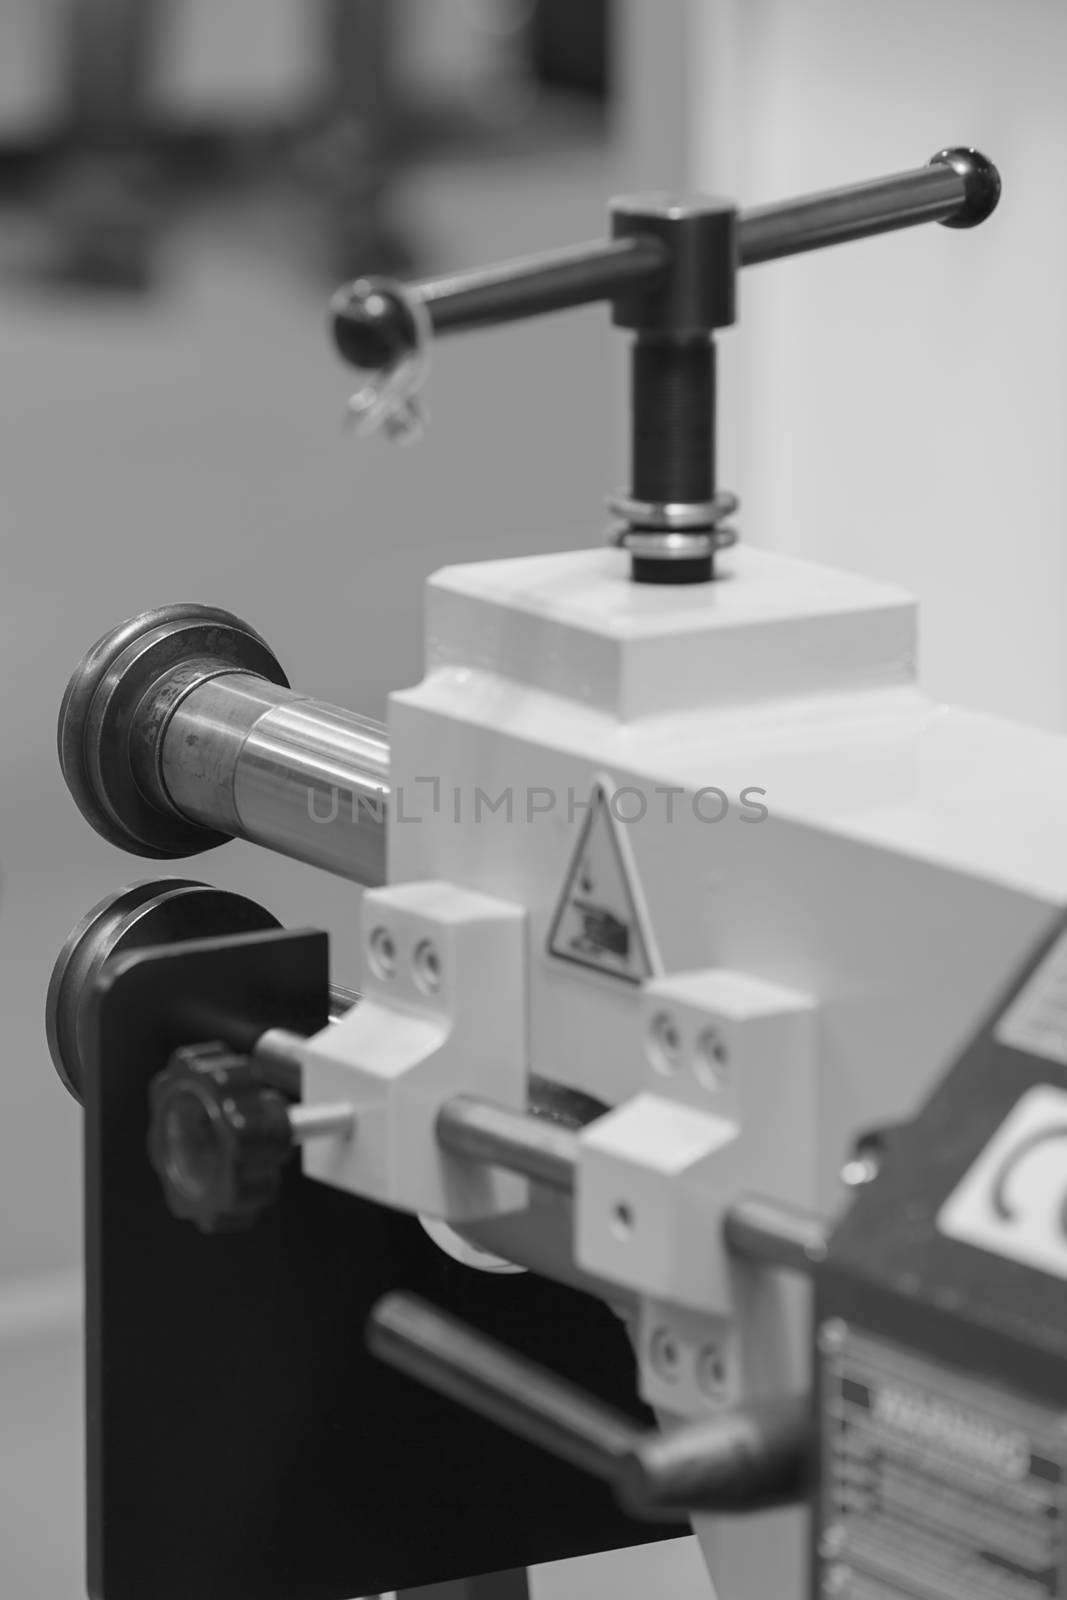 detail of hydraulic press for metalworking, note shallow depth of field